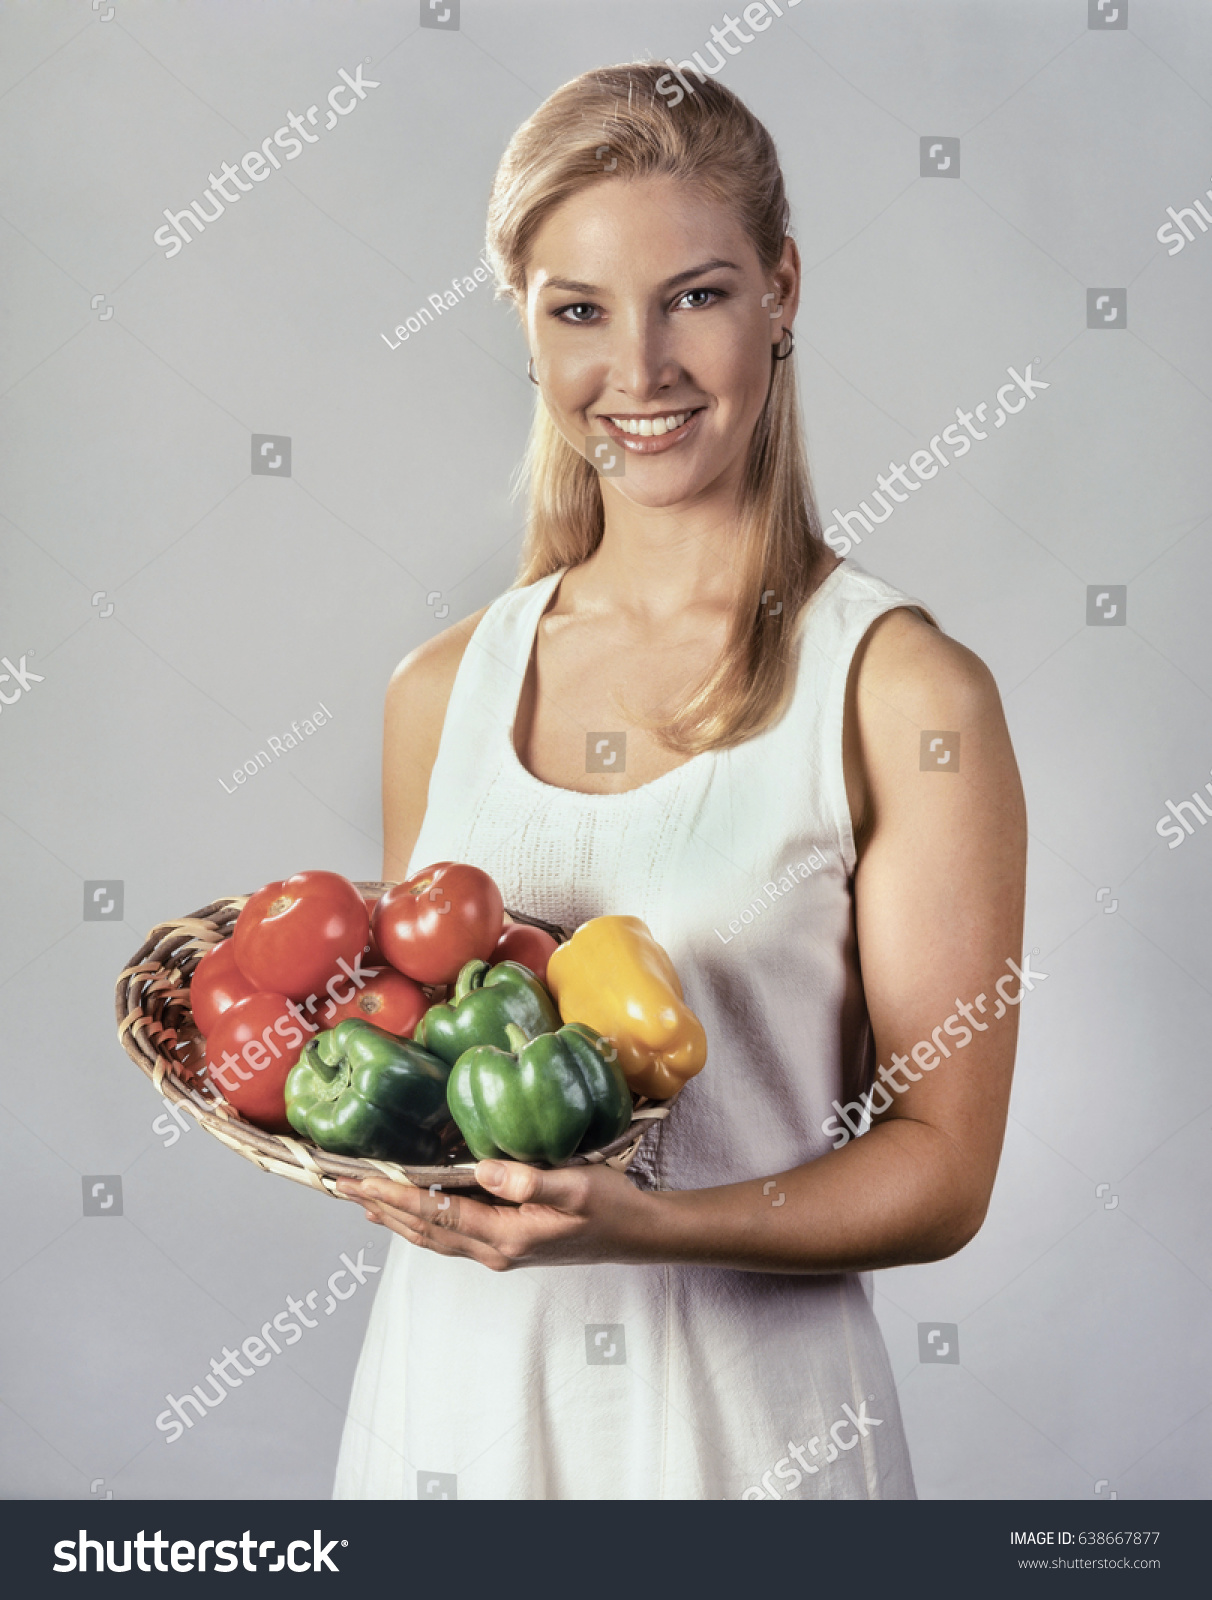 young Pretty Girl Stock Photo (Royalty Free) 638667877 - Shutterstock